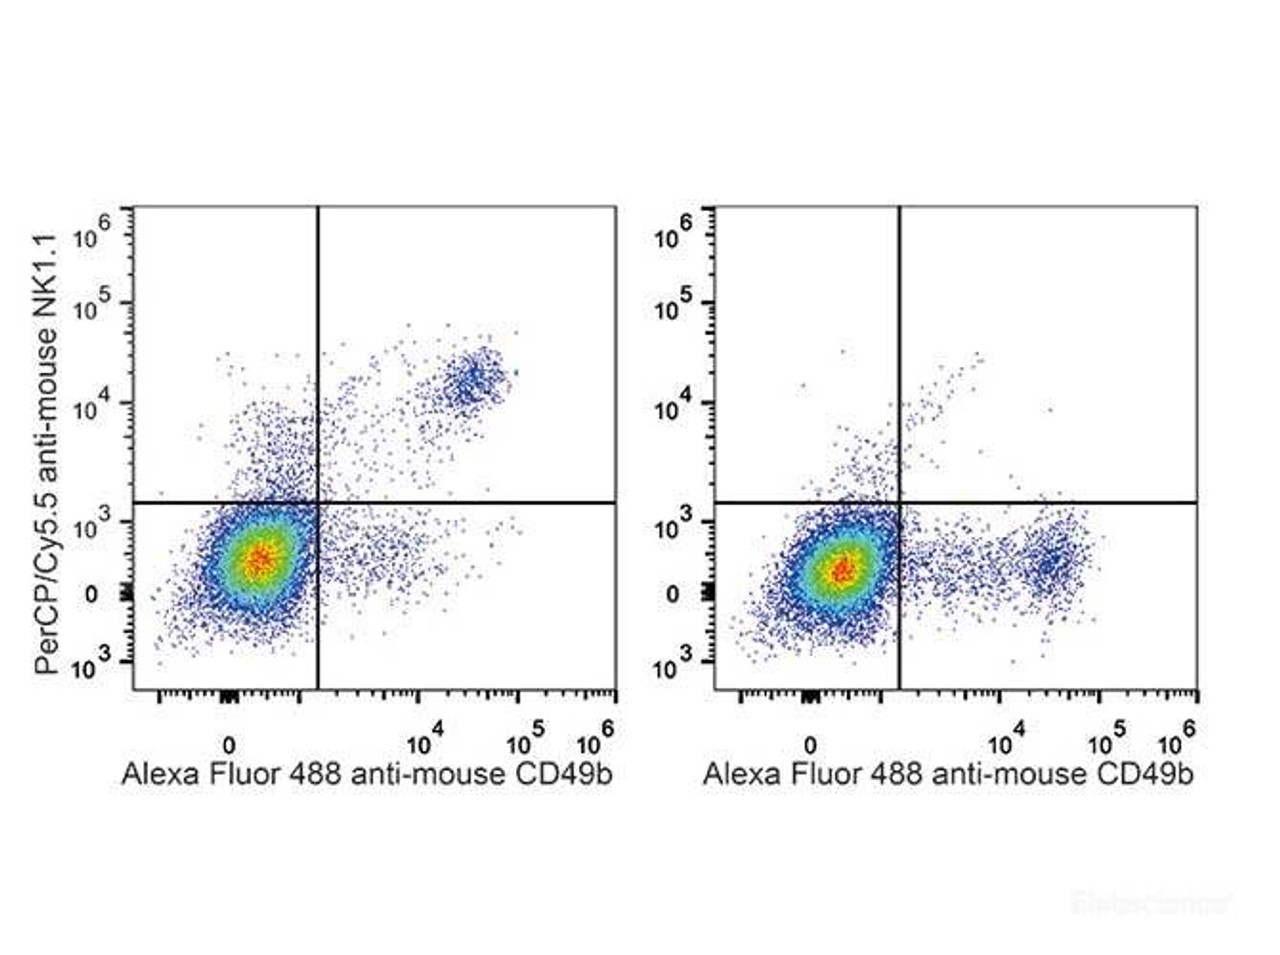 C57BL/6 murine splenocytes are stained with PerCP/Cyanine5.5 Anti-Mouse CD161/NK1.1 Antibody and AF488 Anti-Mouse CD49b Antibody (Left). Splenocytes stained with AF488 Anti-Mouse CD49b Antibody(Right) are used as control.